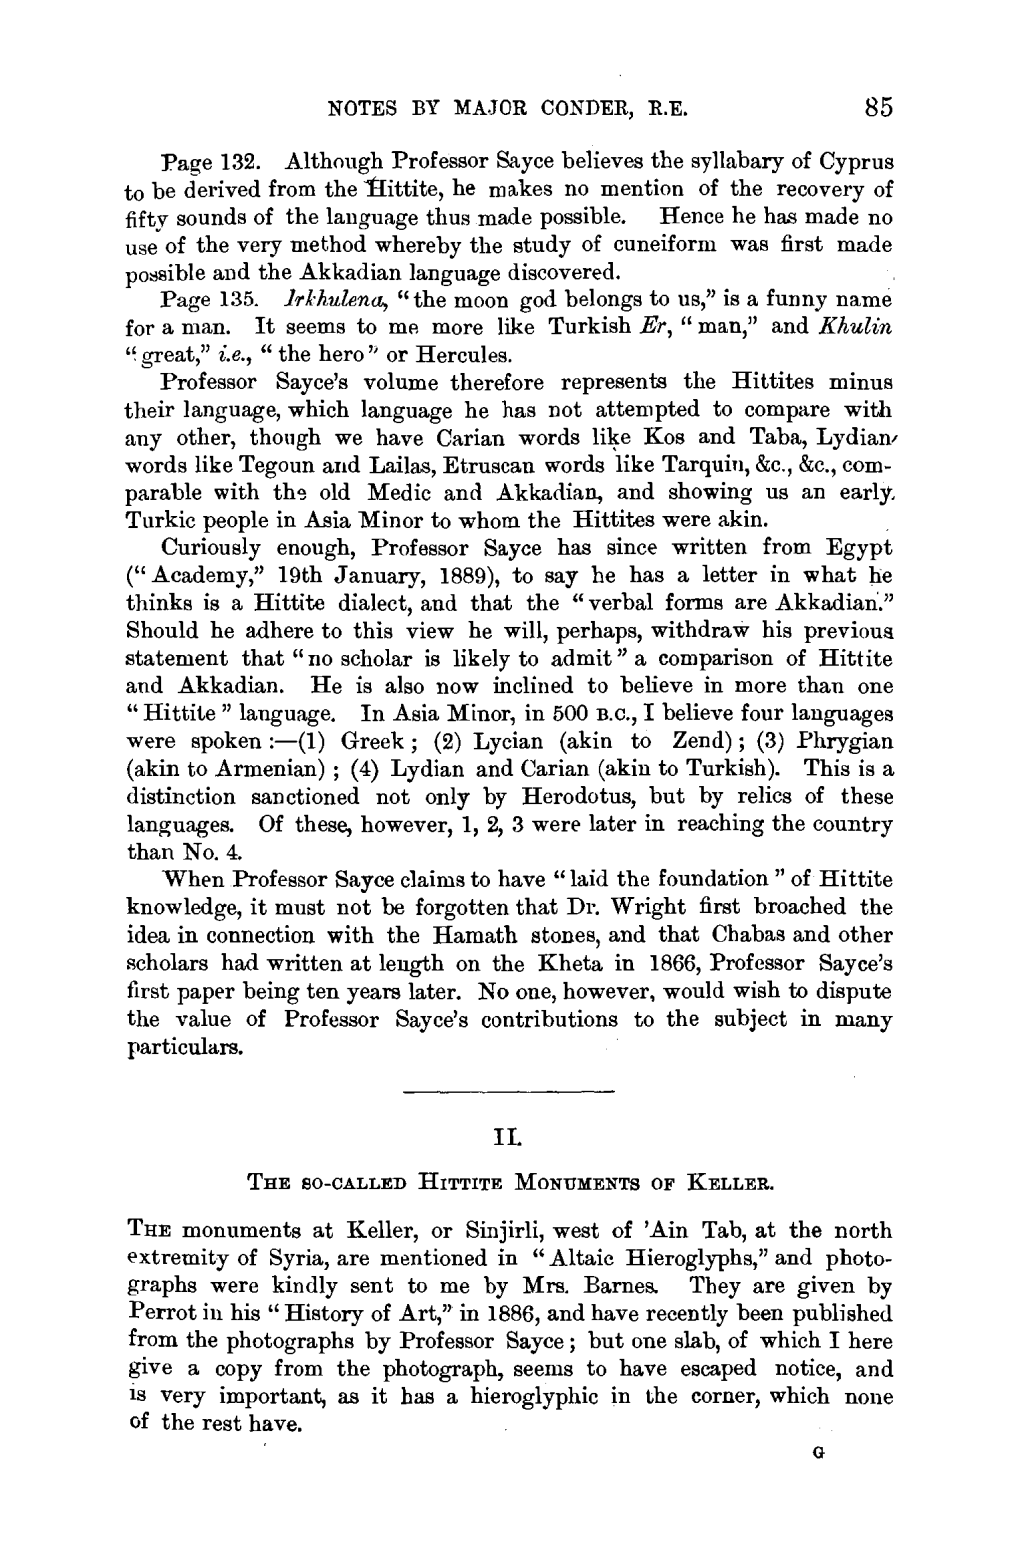 [1848-1910], "Notes: II. the So-Called Hittite Monuments of Keller,"